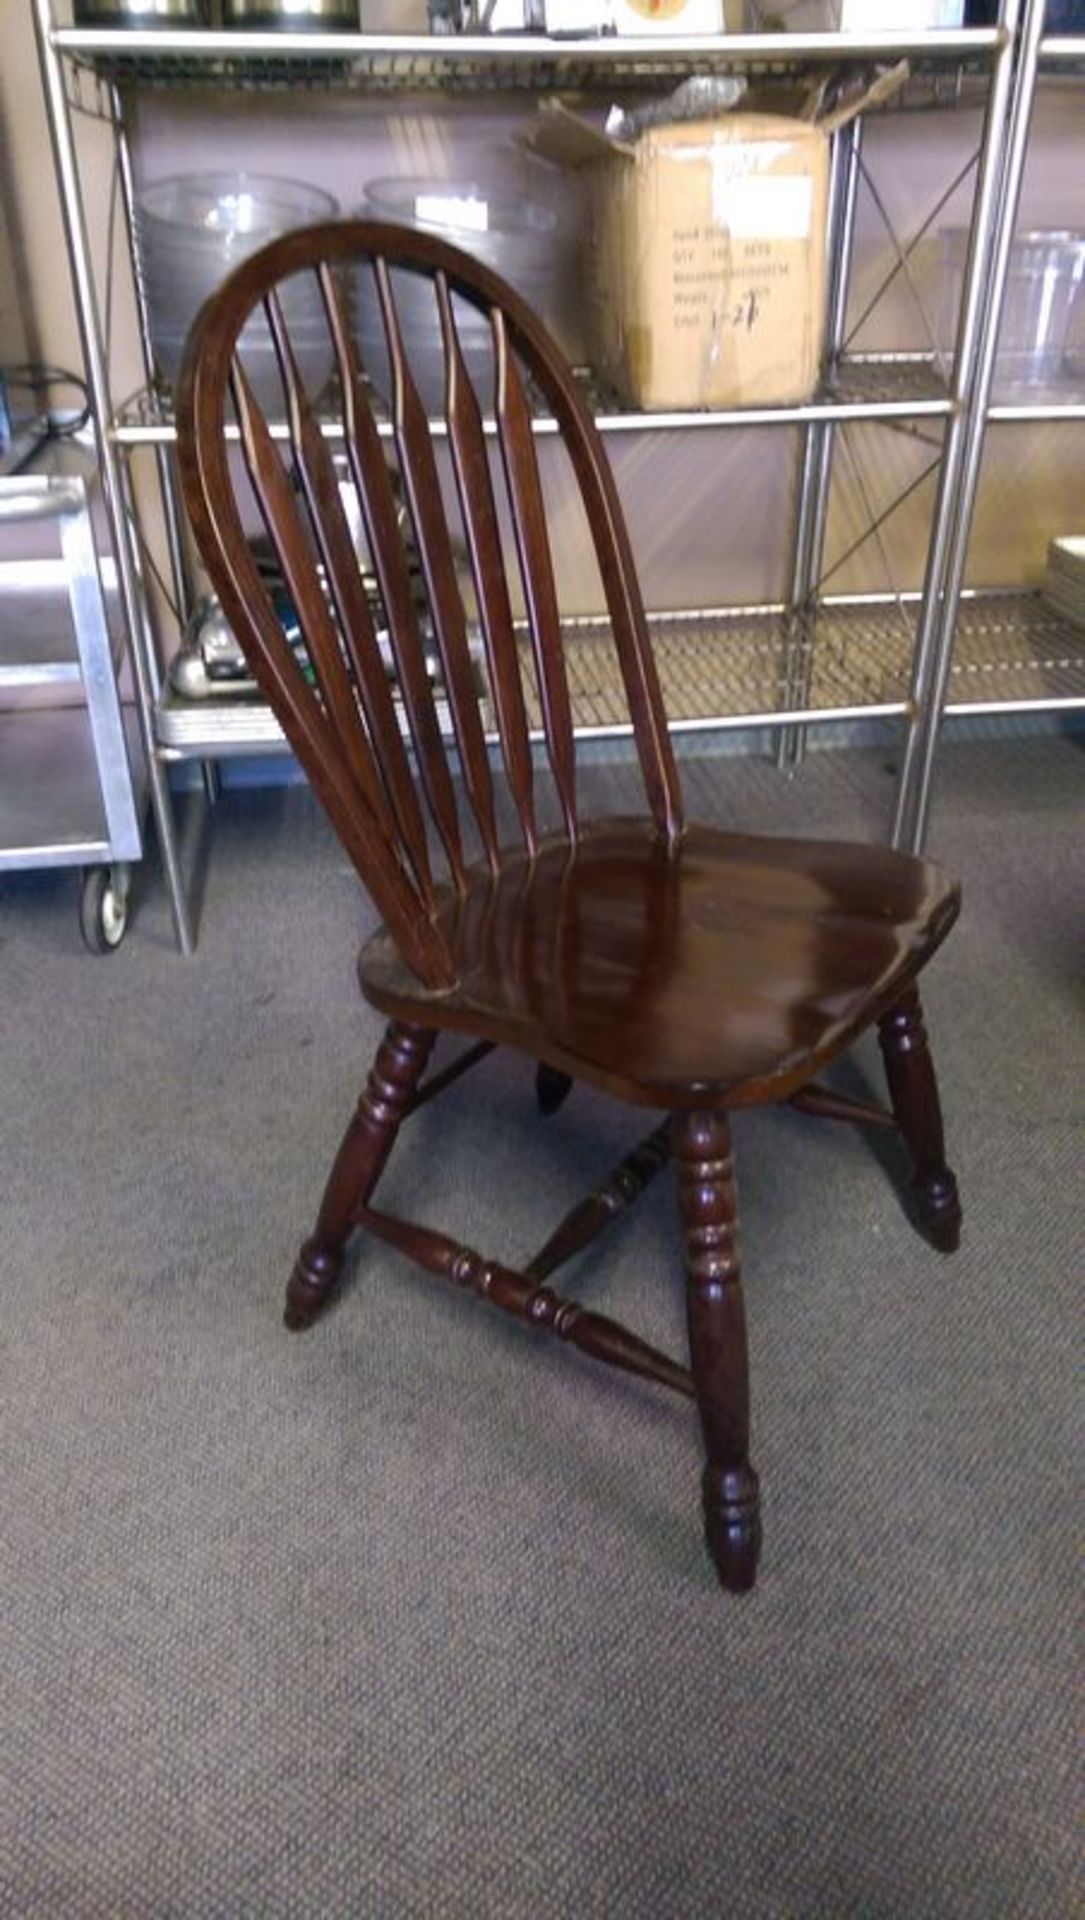 6 Mahogany Dining Chairs - Price each times 6